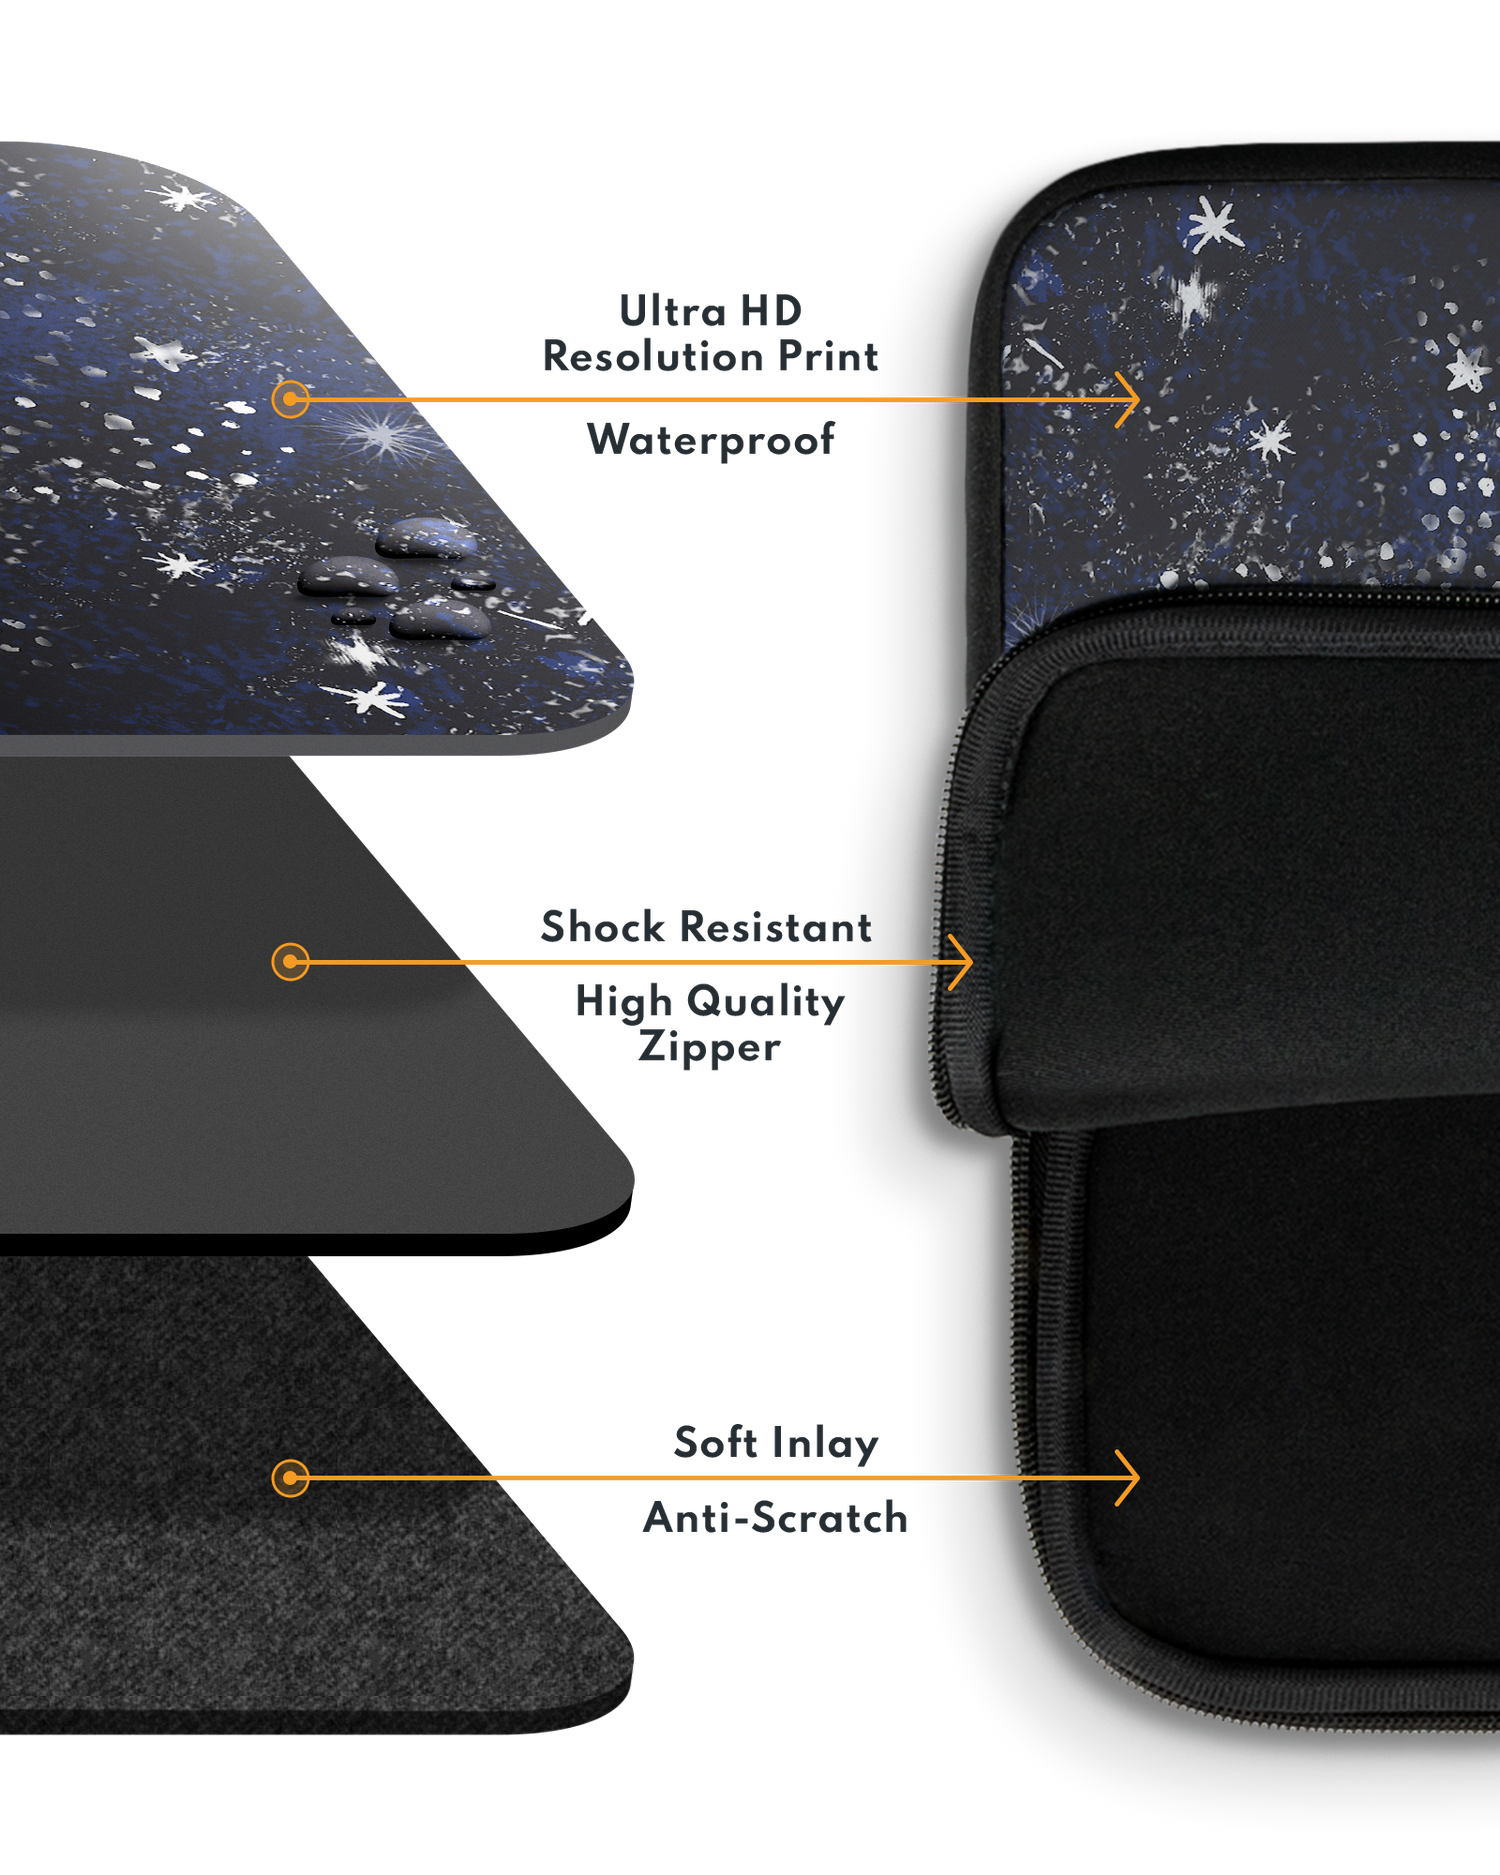 Starry Night Sky Laptop Case 14-15 inch with soft inner lining